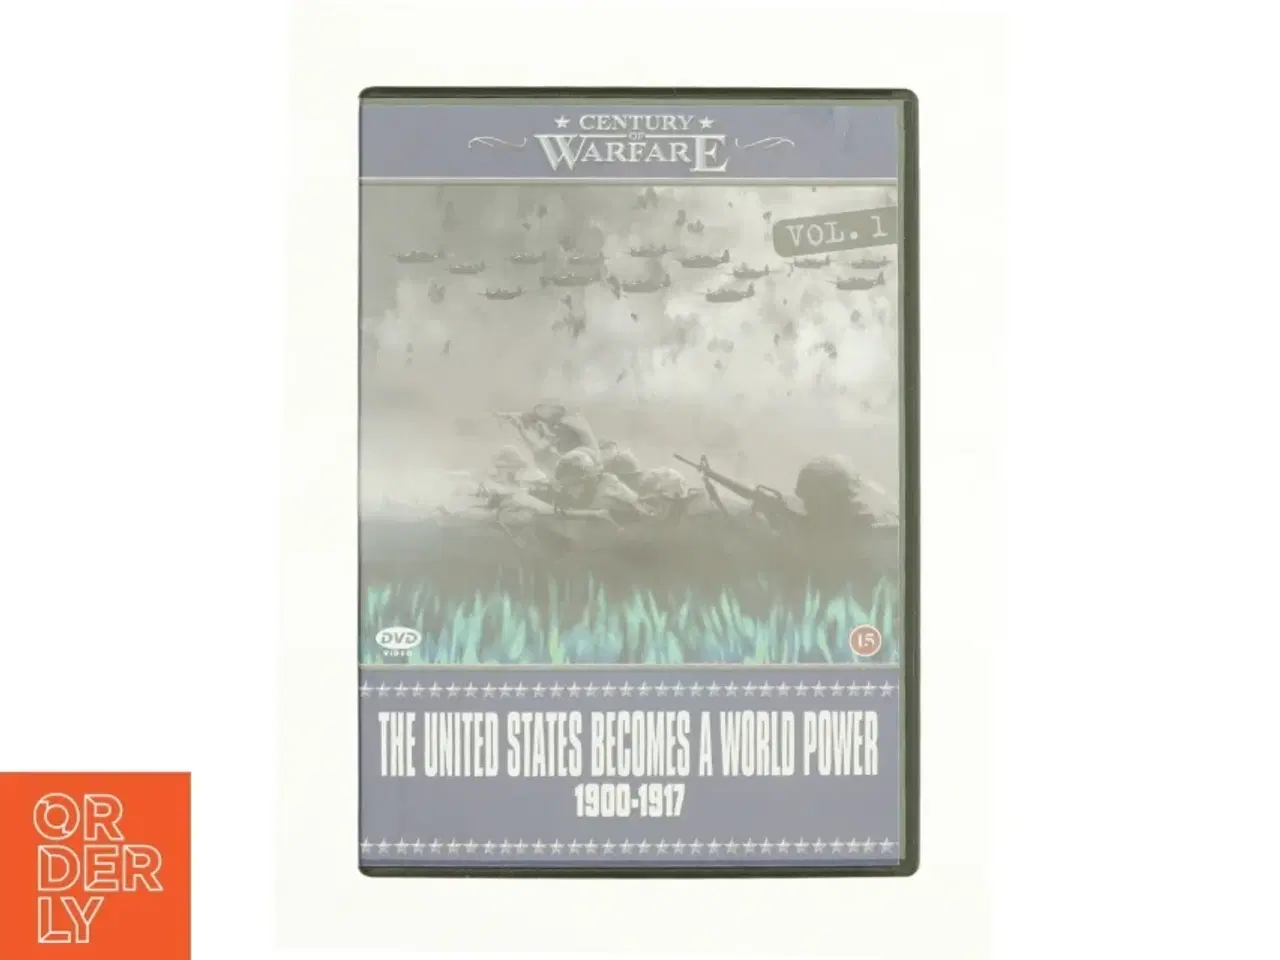 Billede 1 - The united states becomes a world power 1900-1917 fra DVD